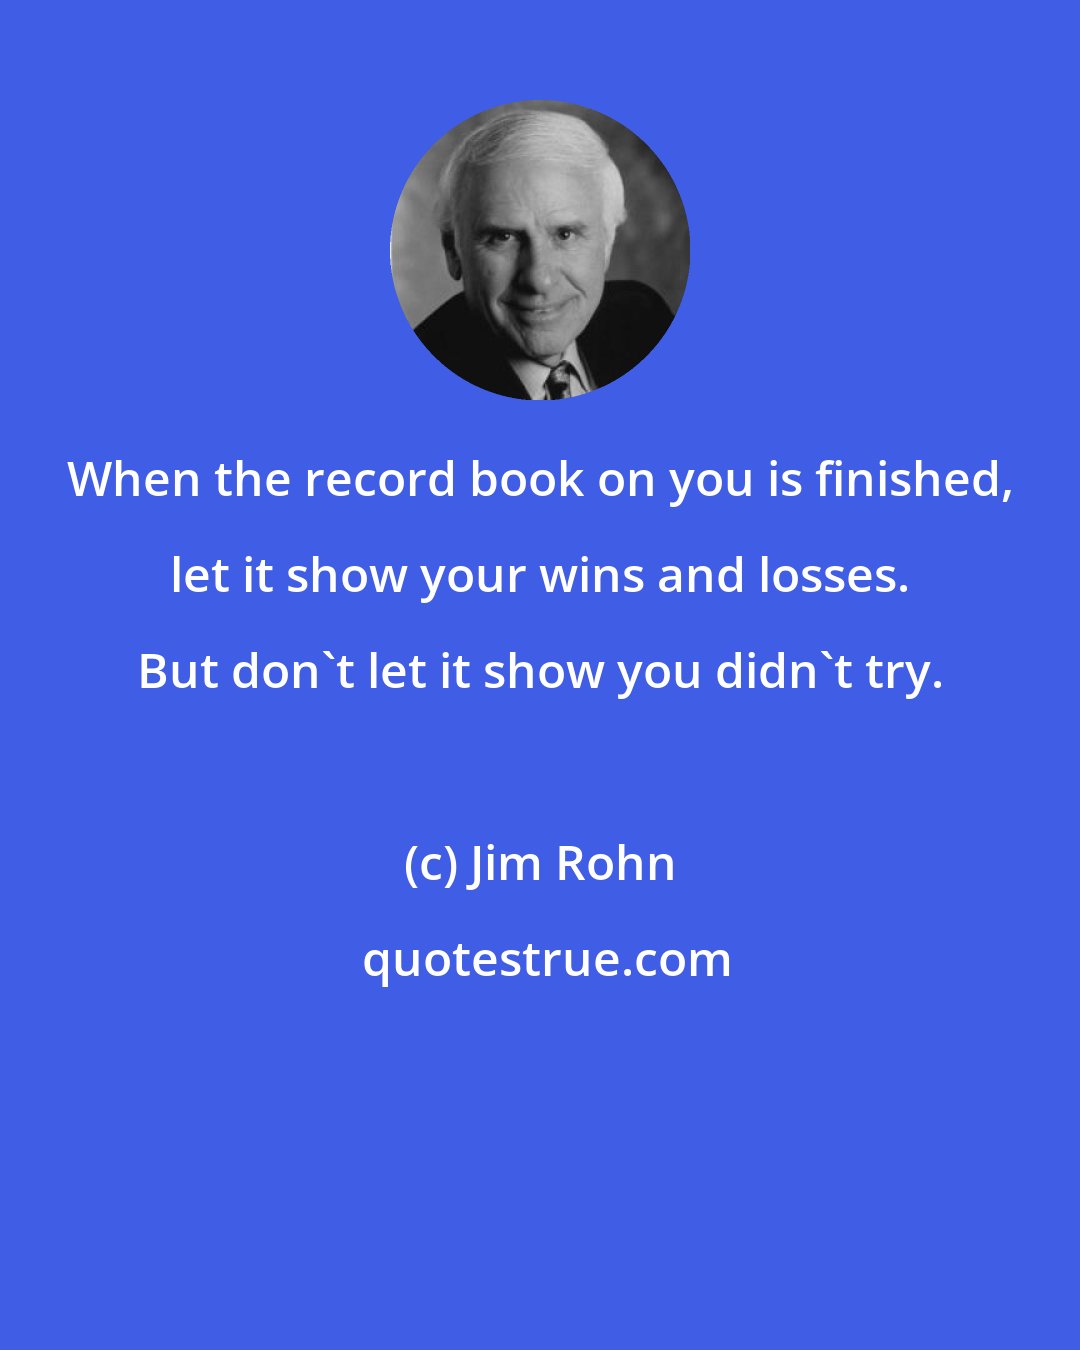 Jim Rohn: When the record book on you is finished, let it show your wins and losses. But don't let it show you didn't try.